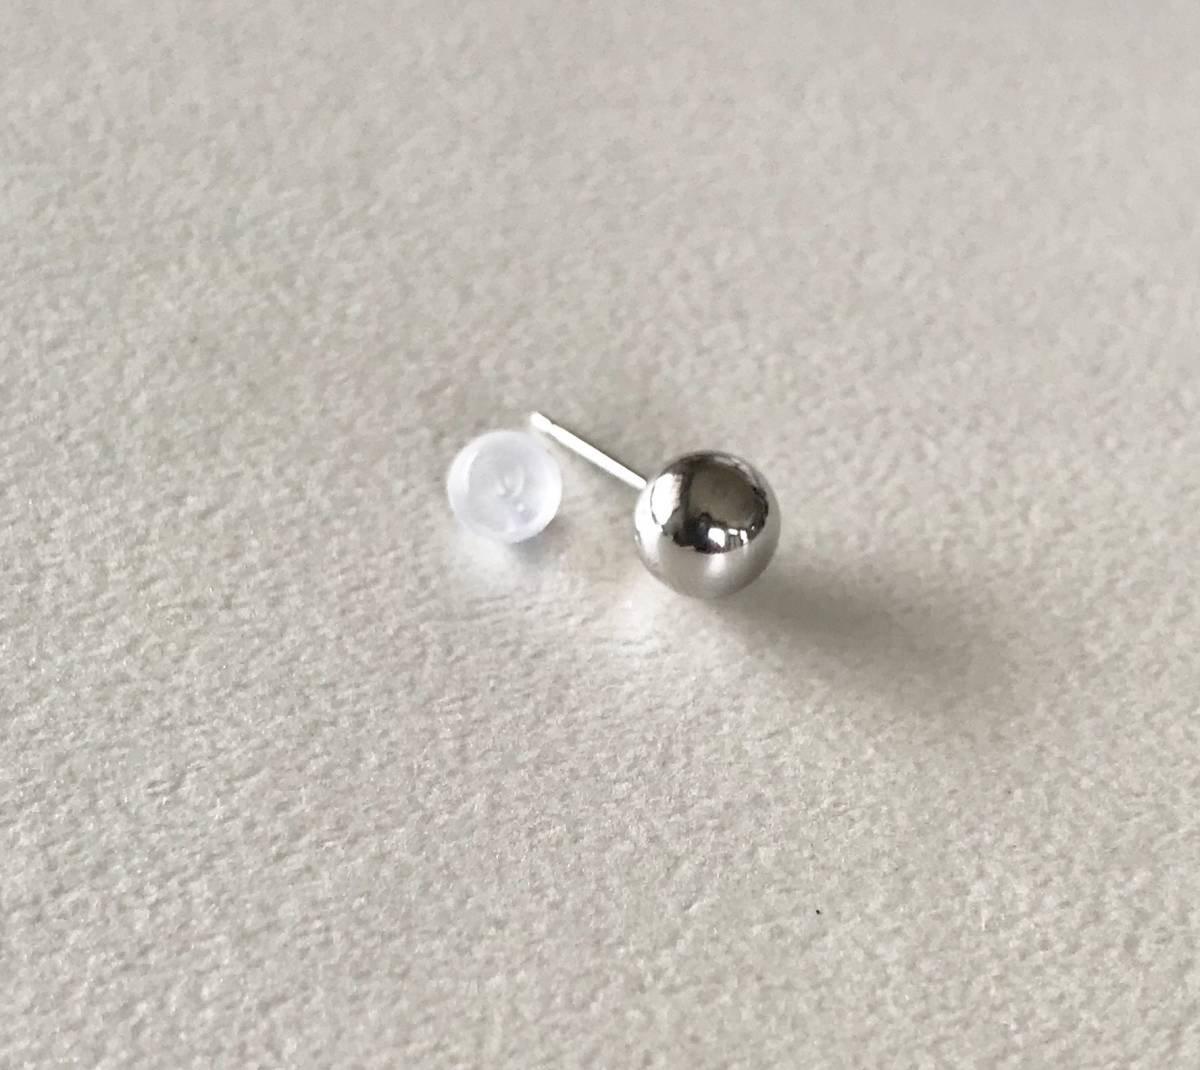  platinum earrings one-side ear earrings 6mm pt900 silicon catch attaching free shipping circle sphere earrings one-side ear 